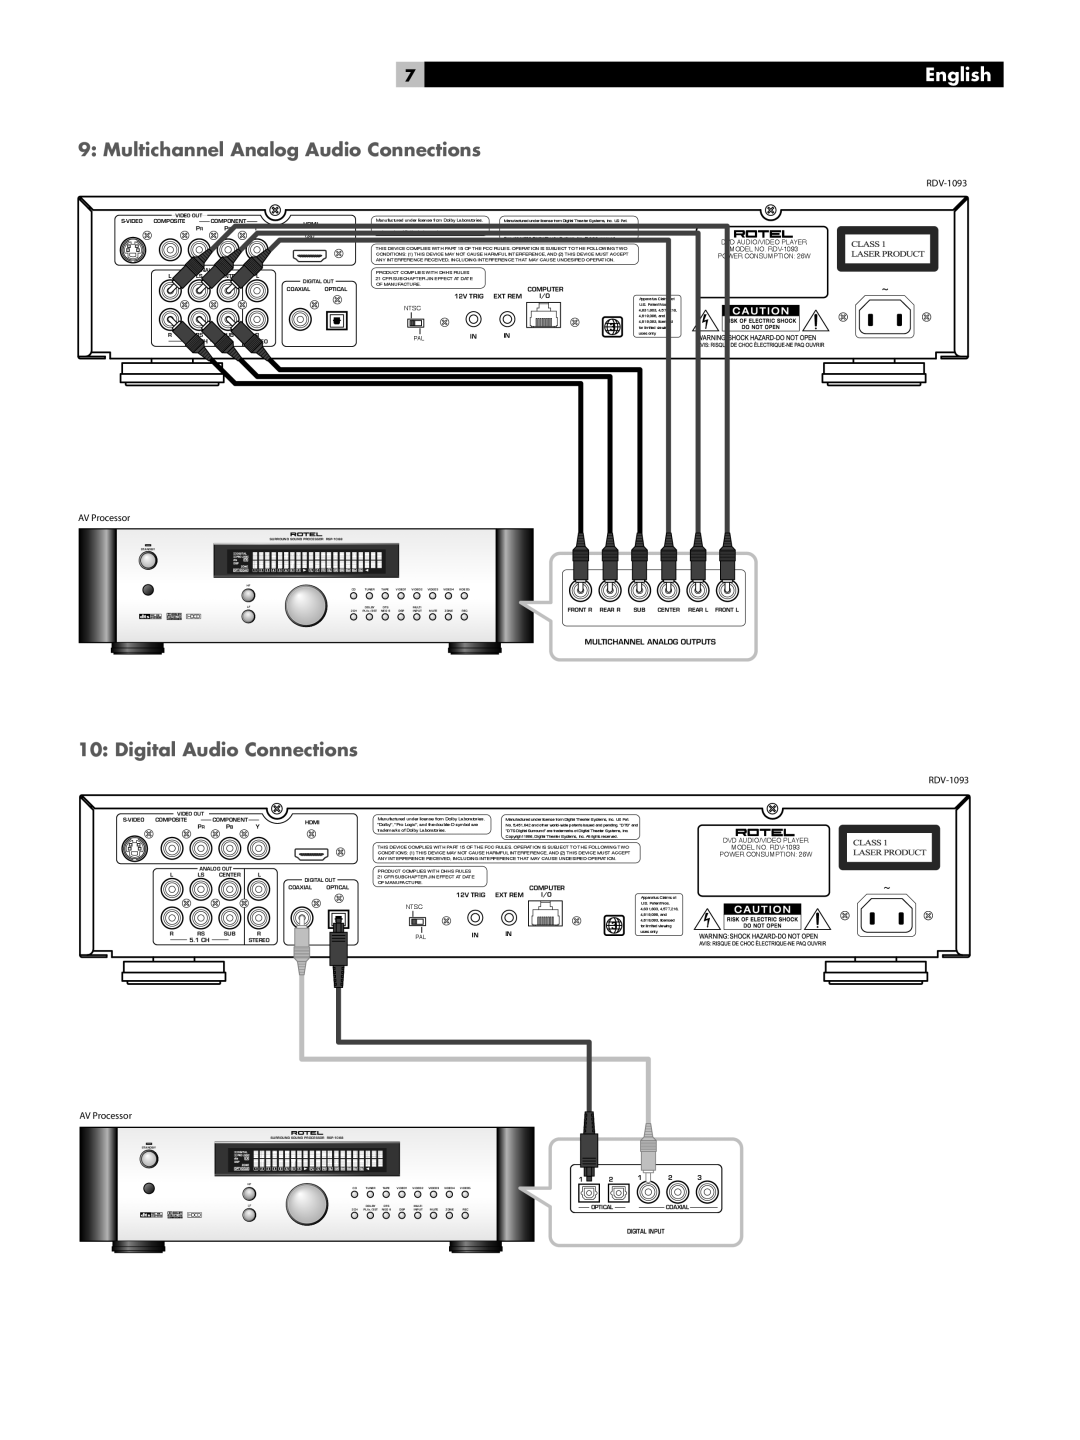 Rotel RDV-1093 owner manual Multichannel Analog Audio Connections, Digital Audio Connections, English, Digital Input, Ntsc 